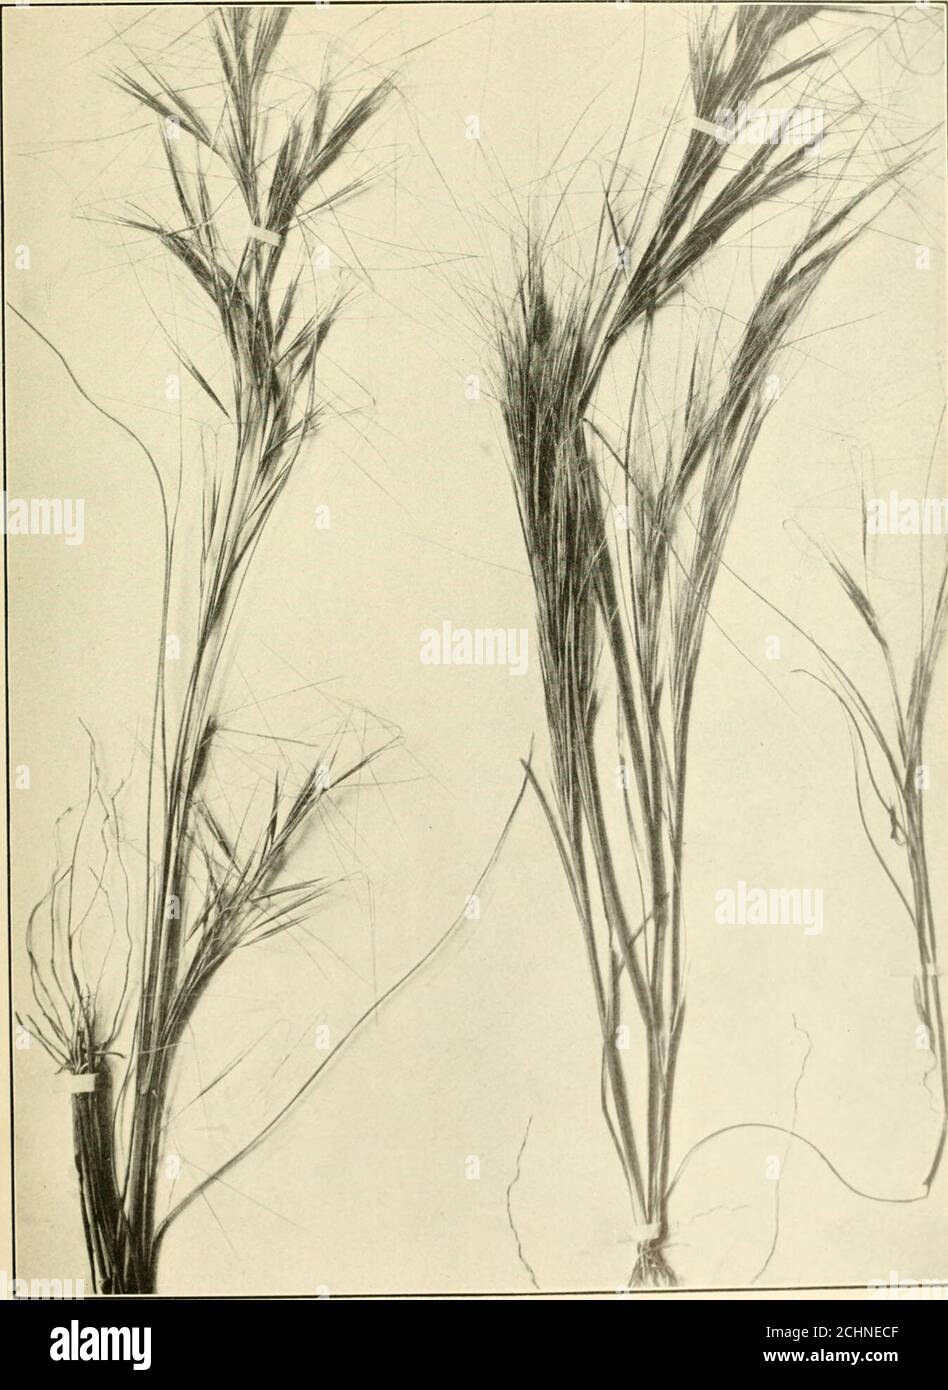 . The book of grasses : an illustrated guide to the common grasses, and the most common of the rushes and sedges . country. The English name of Three- awned Grass is descriptive of a peculiarity of the genus, as each flowering scale bears triple awns. In PovertyM Grass and Slender Aristida the outer awns of the flowering scale are shorter than the middle awn and are upright, while the long middle awn spreads stiffly at right angles to the spike. When the spikelets are comparatively few, as in the species mentioned above, these horizontally spreading awns are so characteristic that from them Stock Photo